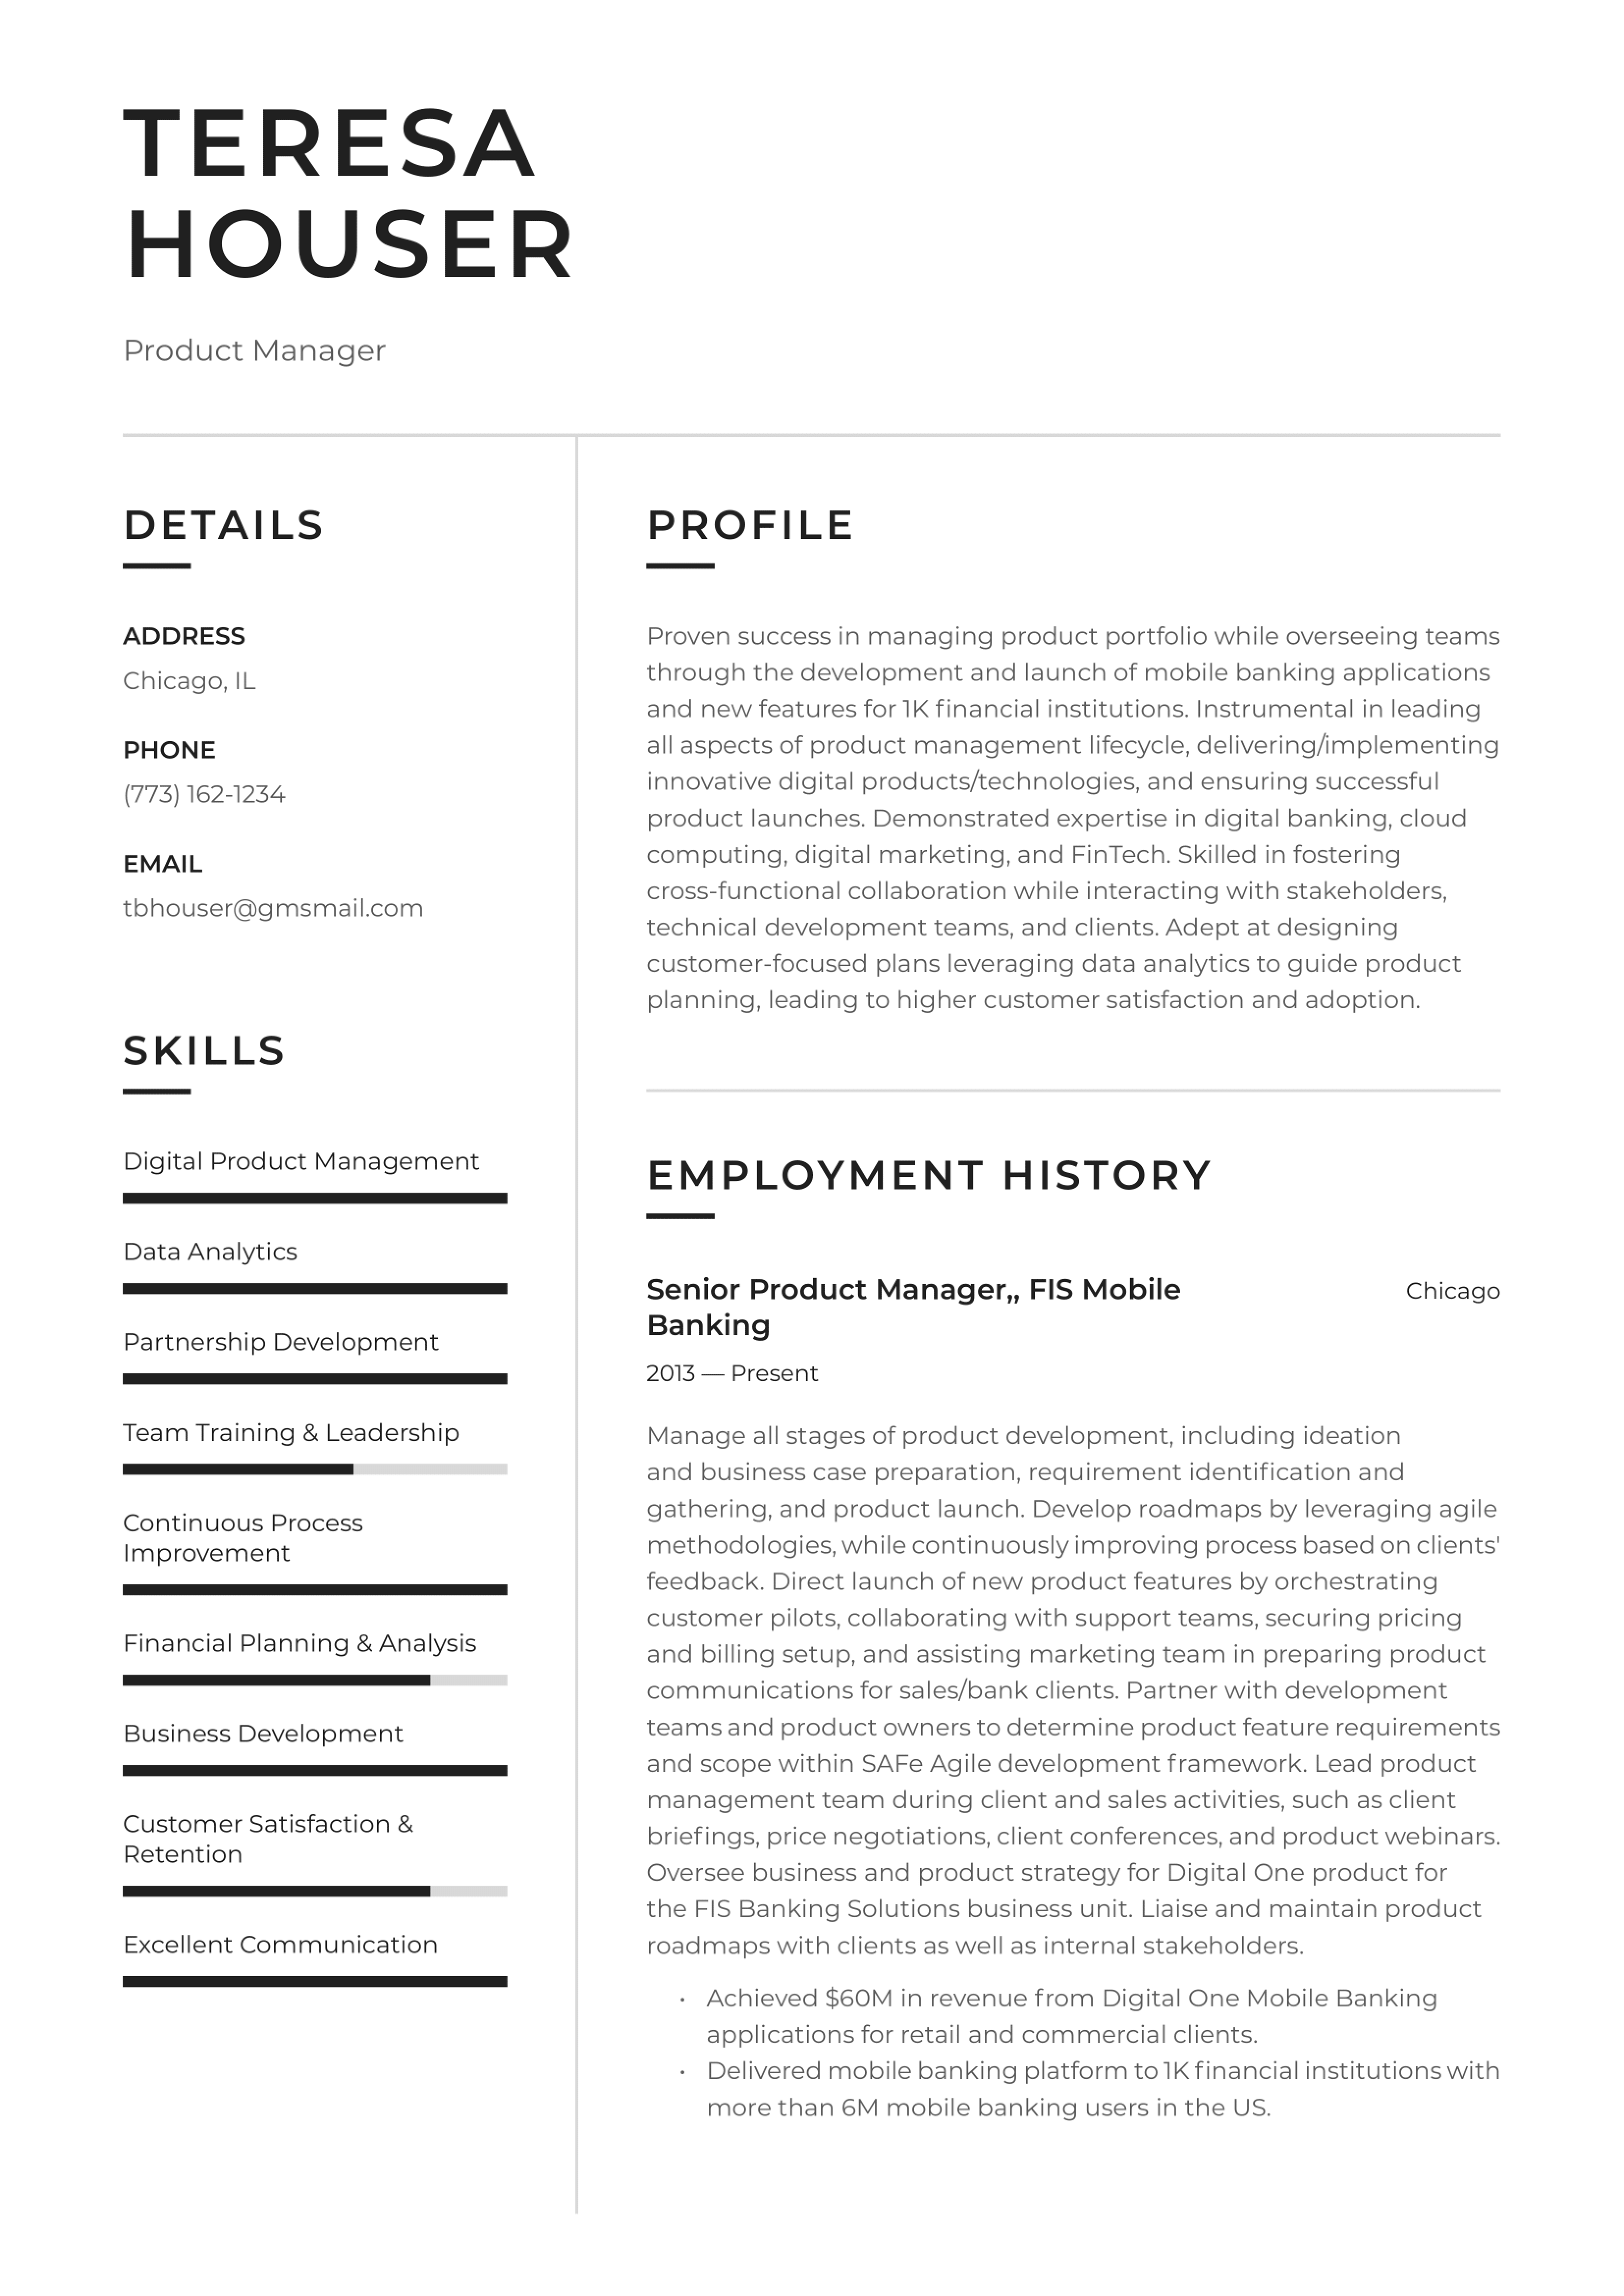 Product Manager Resume Example 